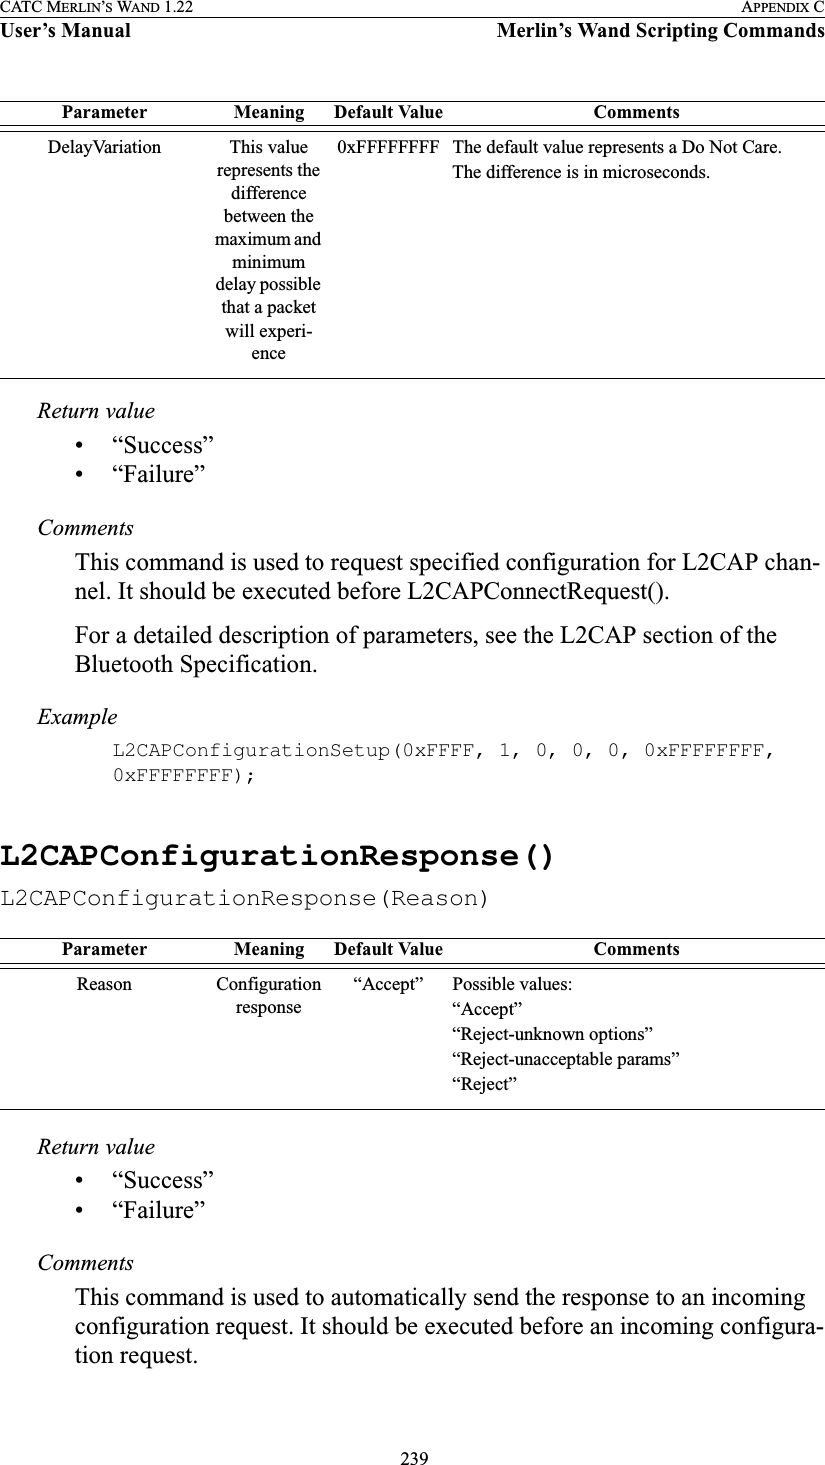  239CATC MERLIN’S WAND 1.22 APPENDIX CUser’s Manual Merlin’s Wand Scripting CommandsReturn value• “Success”• “Failure”CommentsThis command is used to request specified configuration for L2CAP chan-nel. It should be executed before L2CAPConnectRequest().For a detailed description of parameters, see the L2CAP section of the Bluetooth Specification.ExampleL2CAPConfigurationSetup(0xFFFF, 1, 0, 0, 0, 0xFFFFFFFF, 0xFFFFFFFF);L2CAPConfigurationResponse()L2CAPConfigurationResponse(Reason)Return value• “Success”• “Failure”CommentsThis command is used to automatically send the response to an incoming configuration request. It should be executed before an incoming configura-tion request.DelayVariation This value represents the difference between the maximum and minimum delay possible that a packet will experi-ence0xFFFFFFFF The default value represents a Do Not Care.The difference is in microseconds.Parameter Meaning Default Value CommentsReason Configuration response“Accept” Possible values:“Accept”“Reject-unknown options”“Reject-unacceptable params”“Reject”Parameter Meaning Default Value Comments